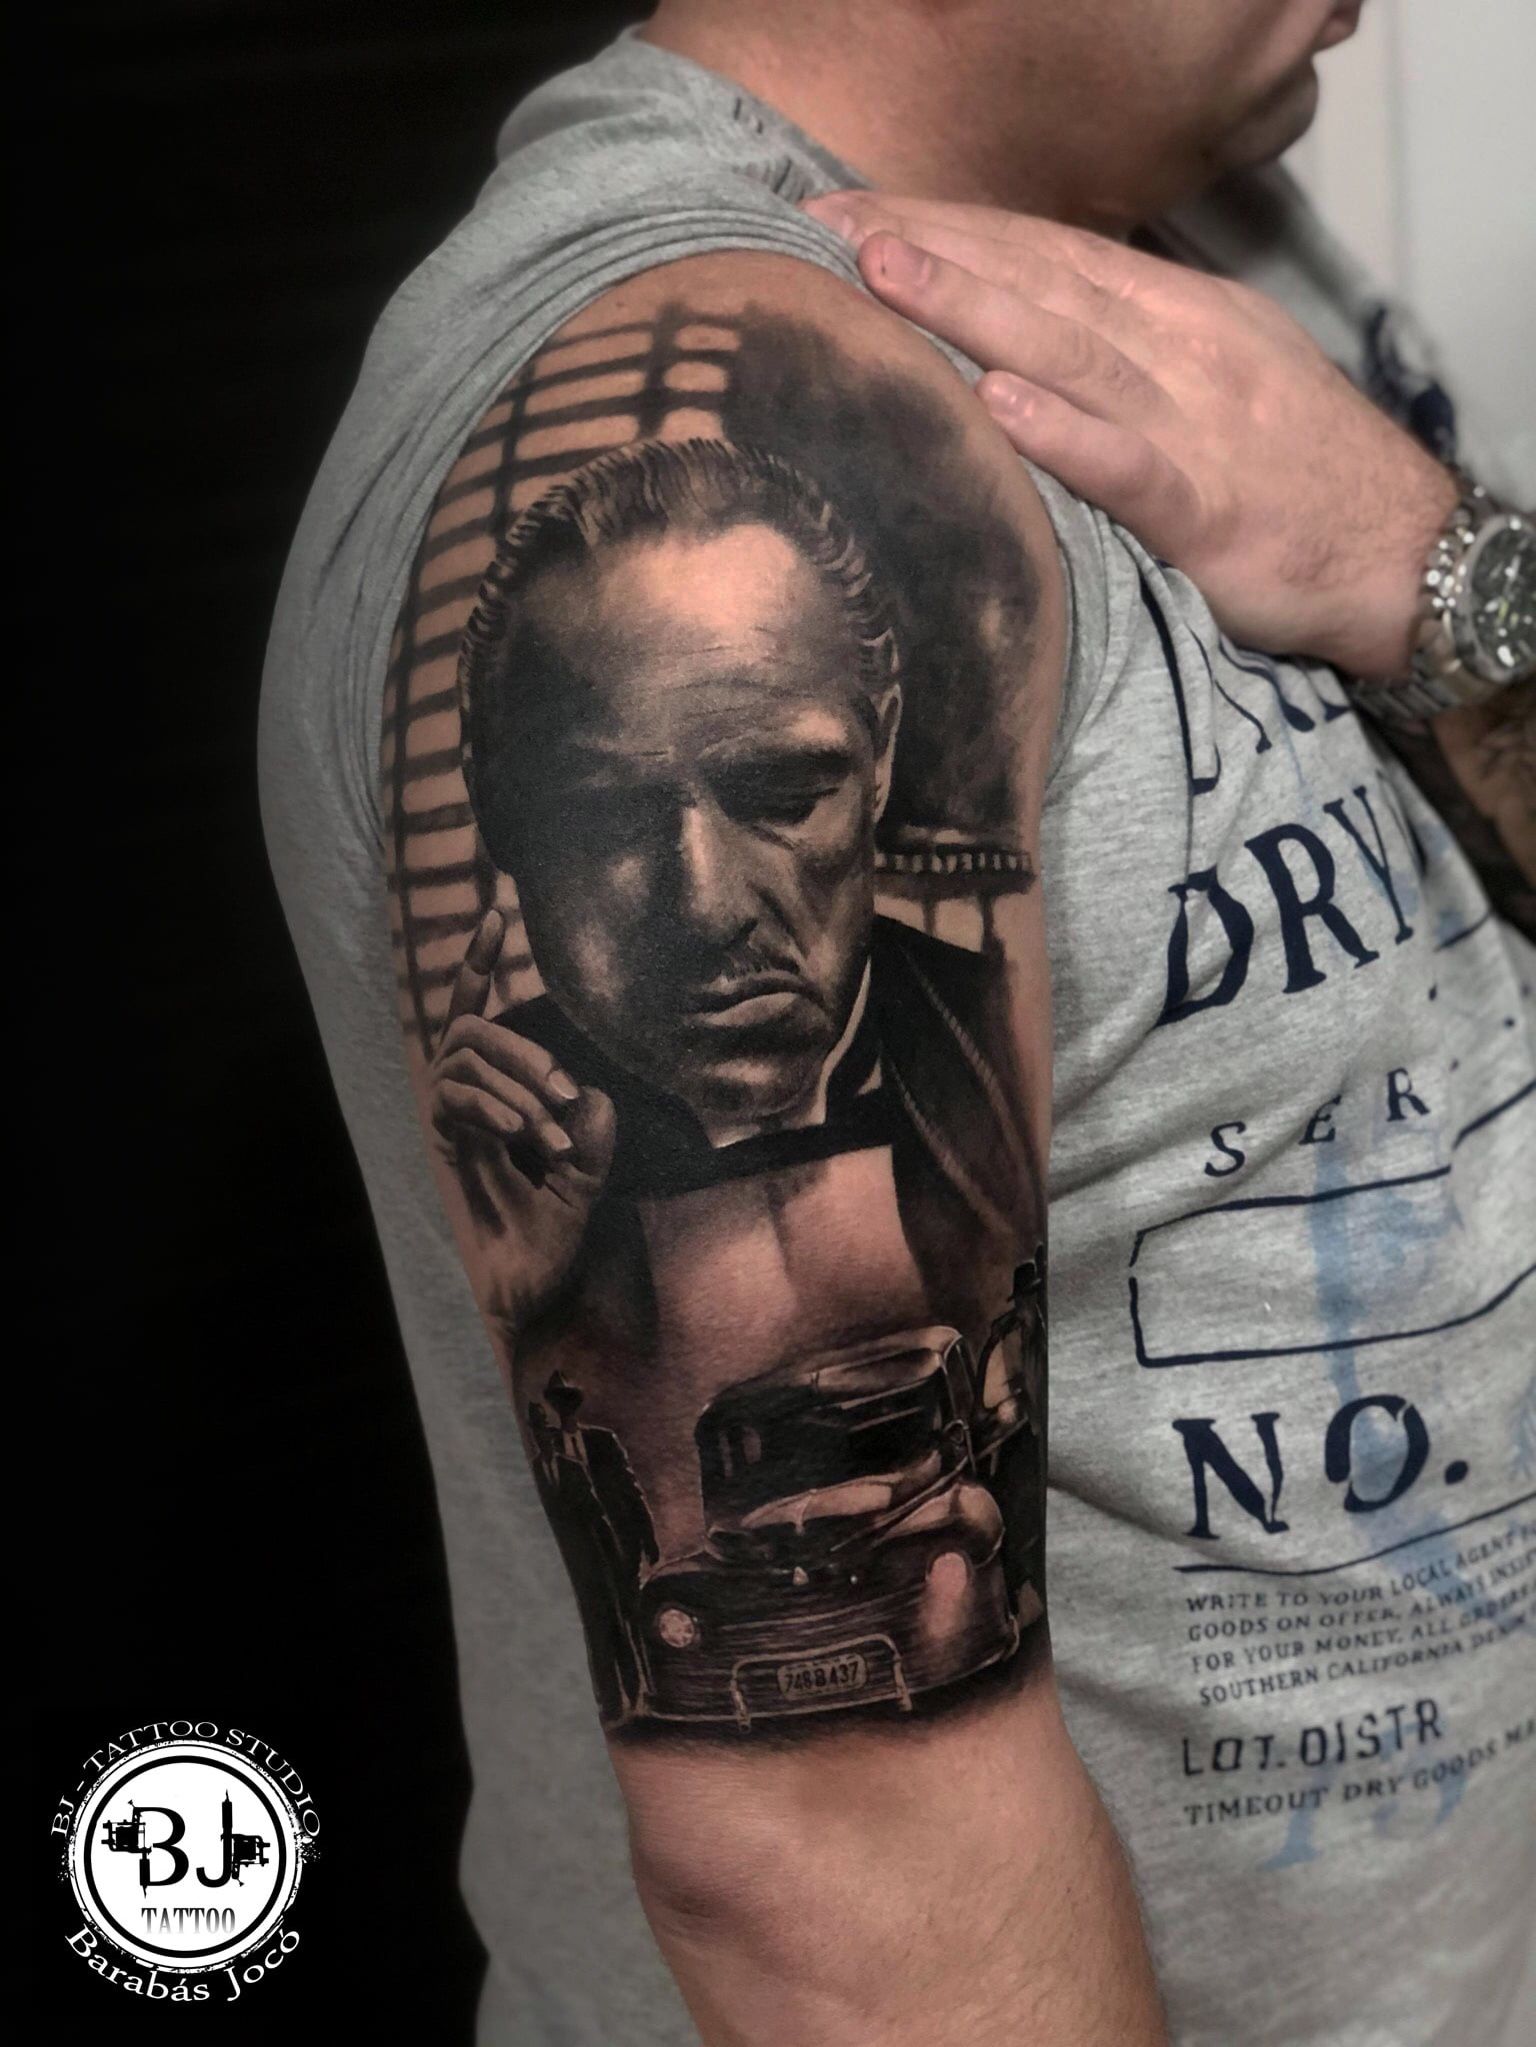 The Godfather Tattoo by Didson Scripts